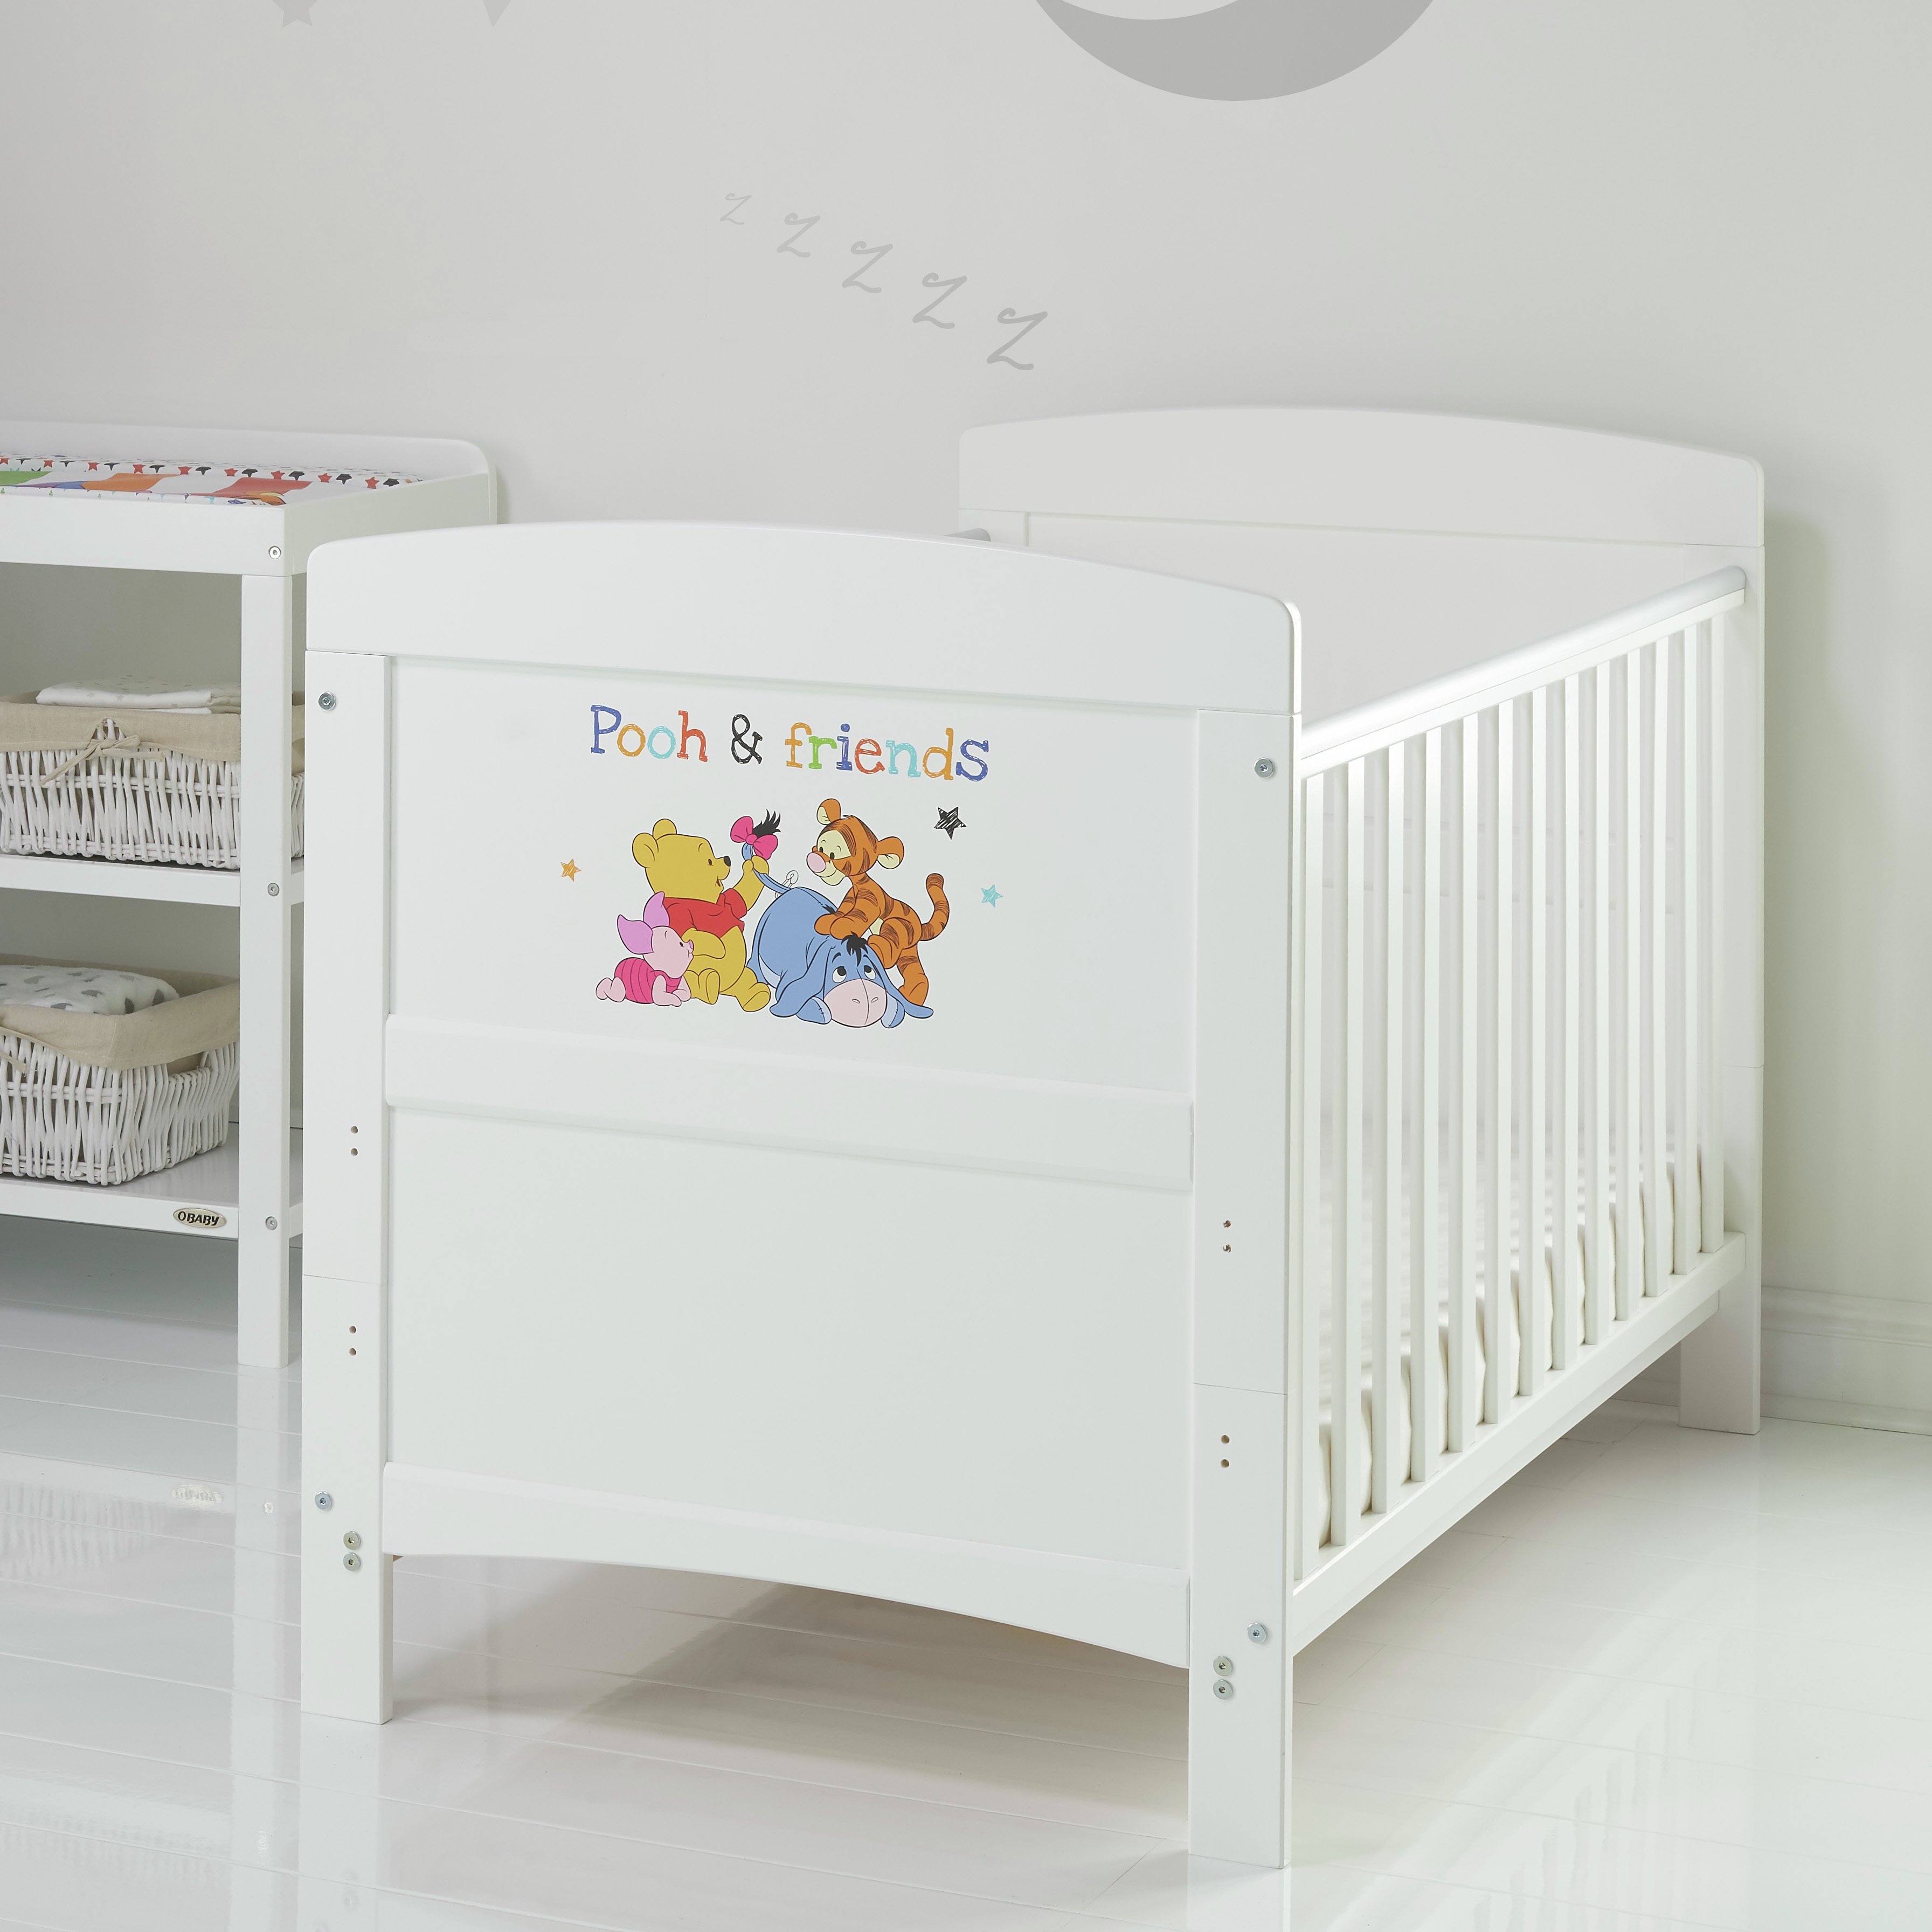 argos cot beds for sale